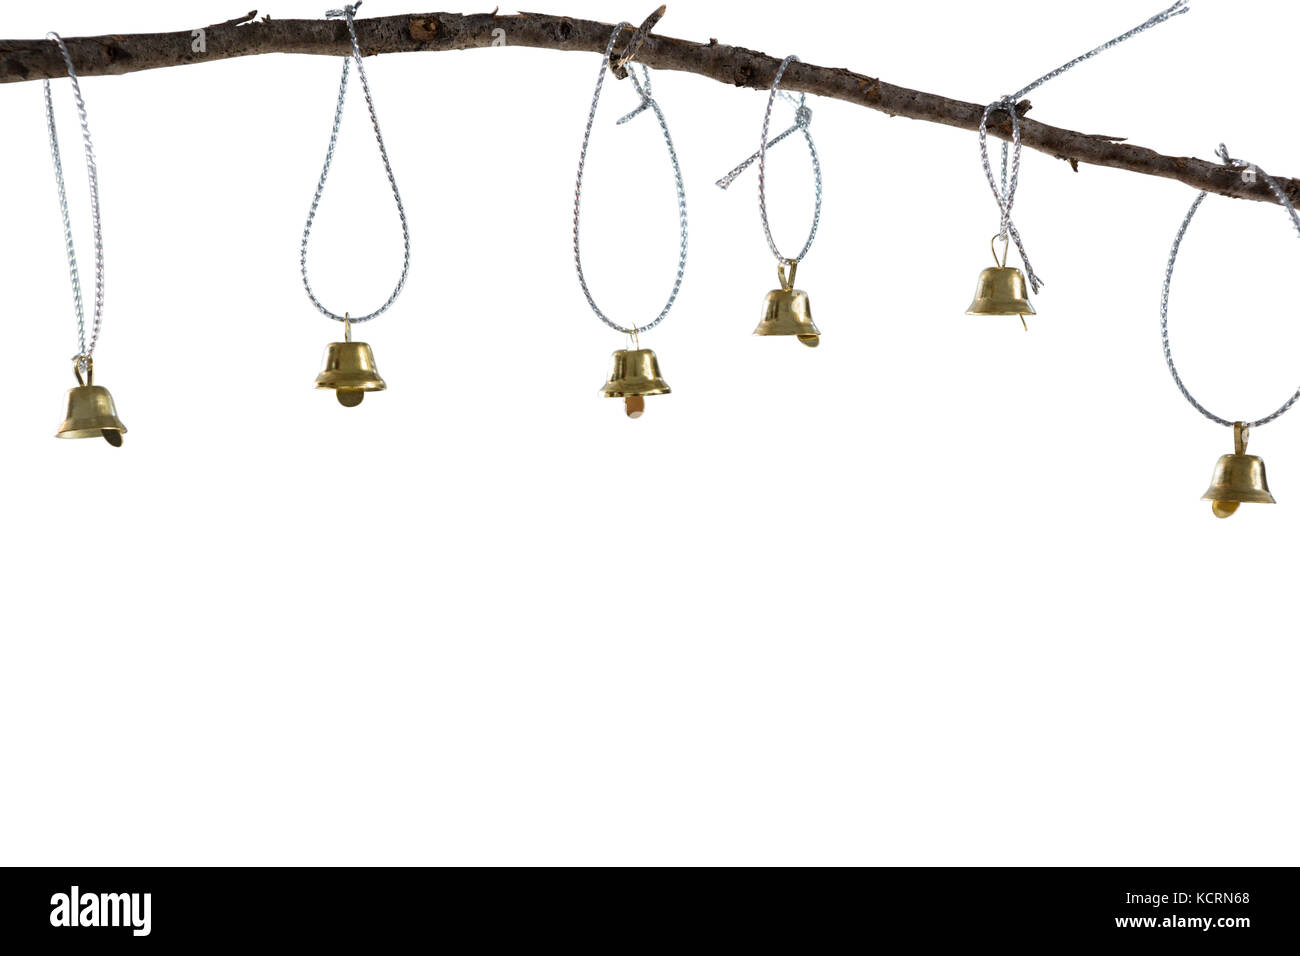 Christmas bells hanging on branch against white background Stock Photo